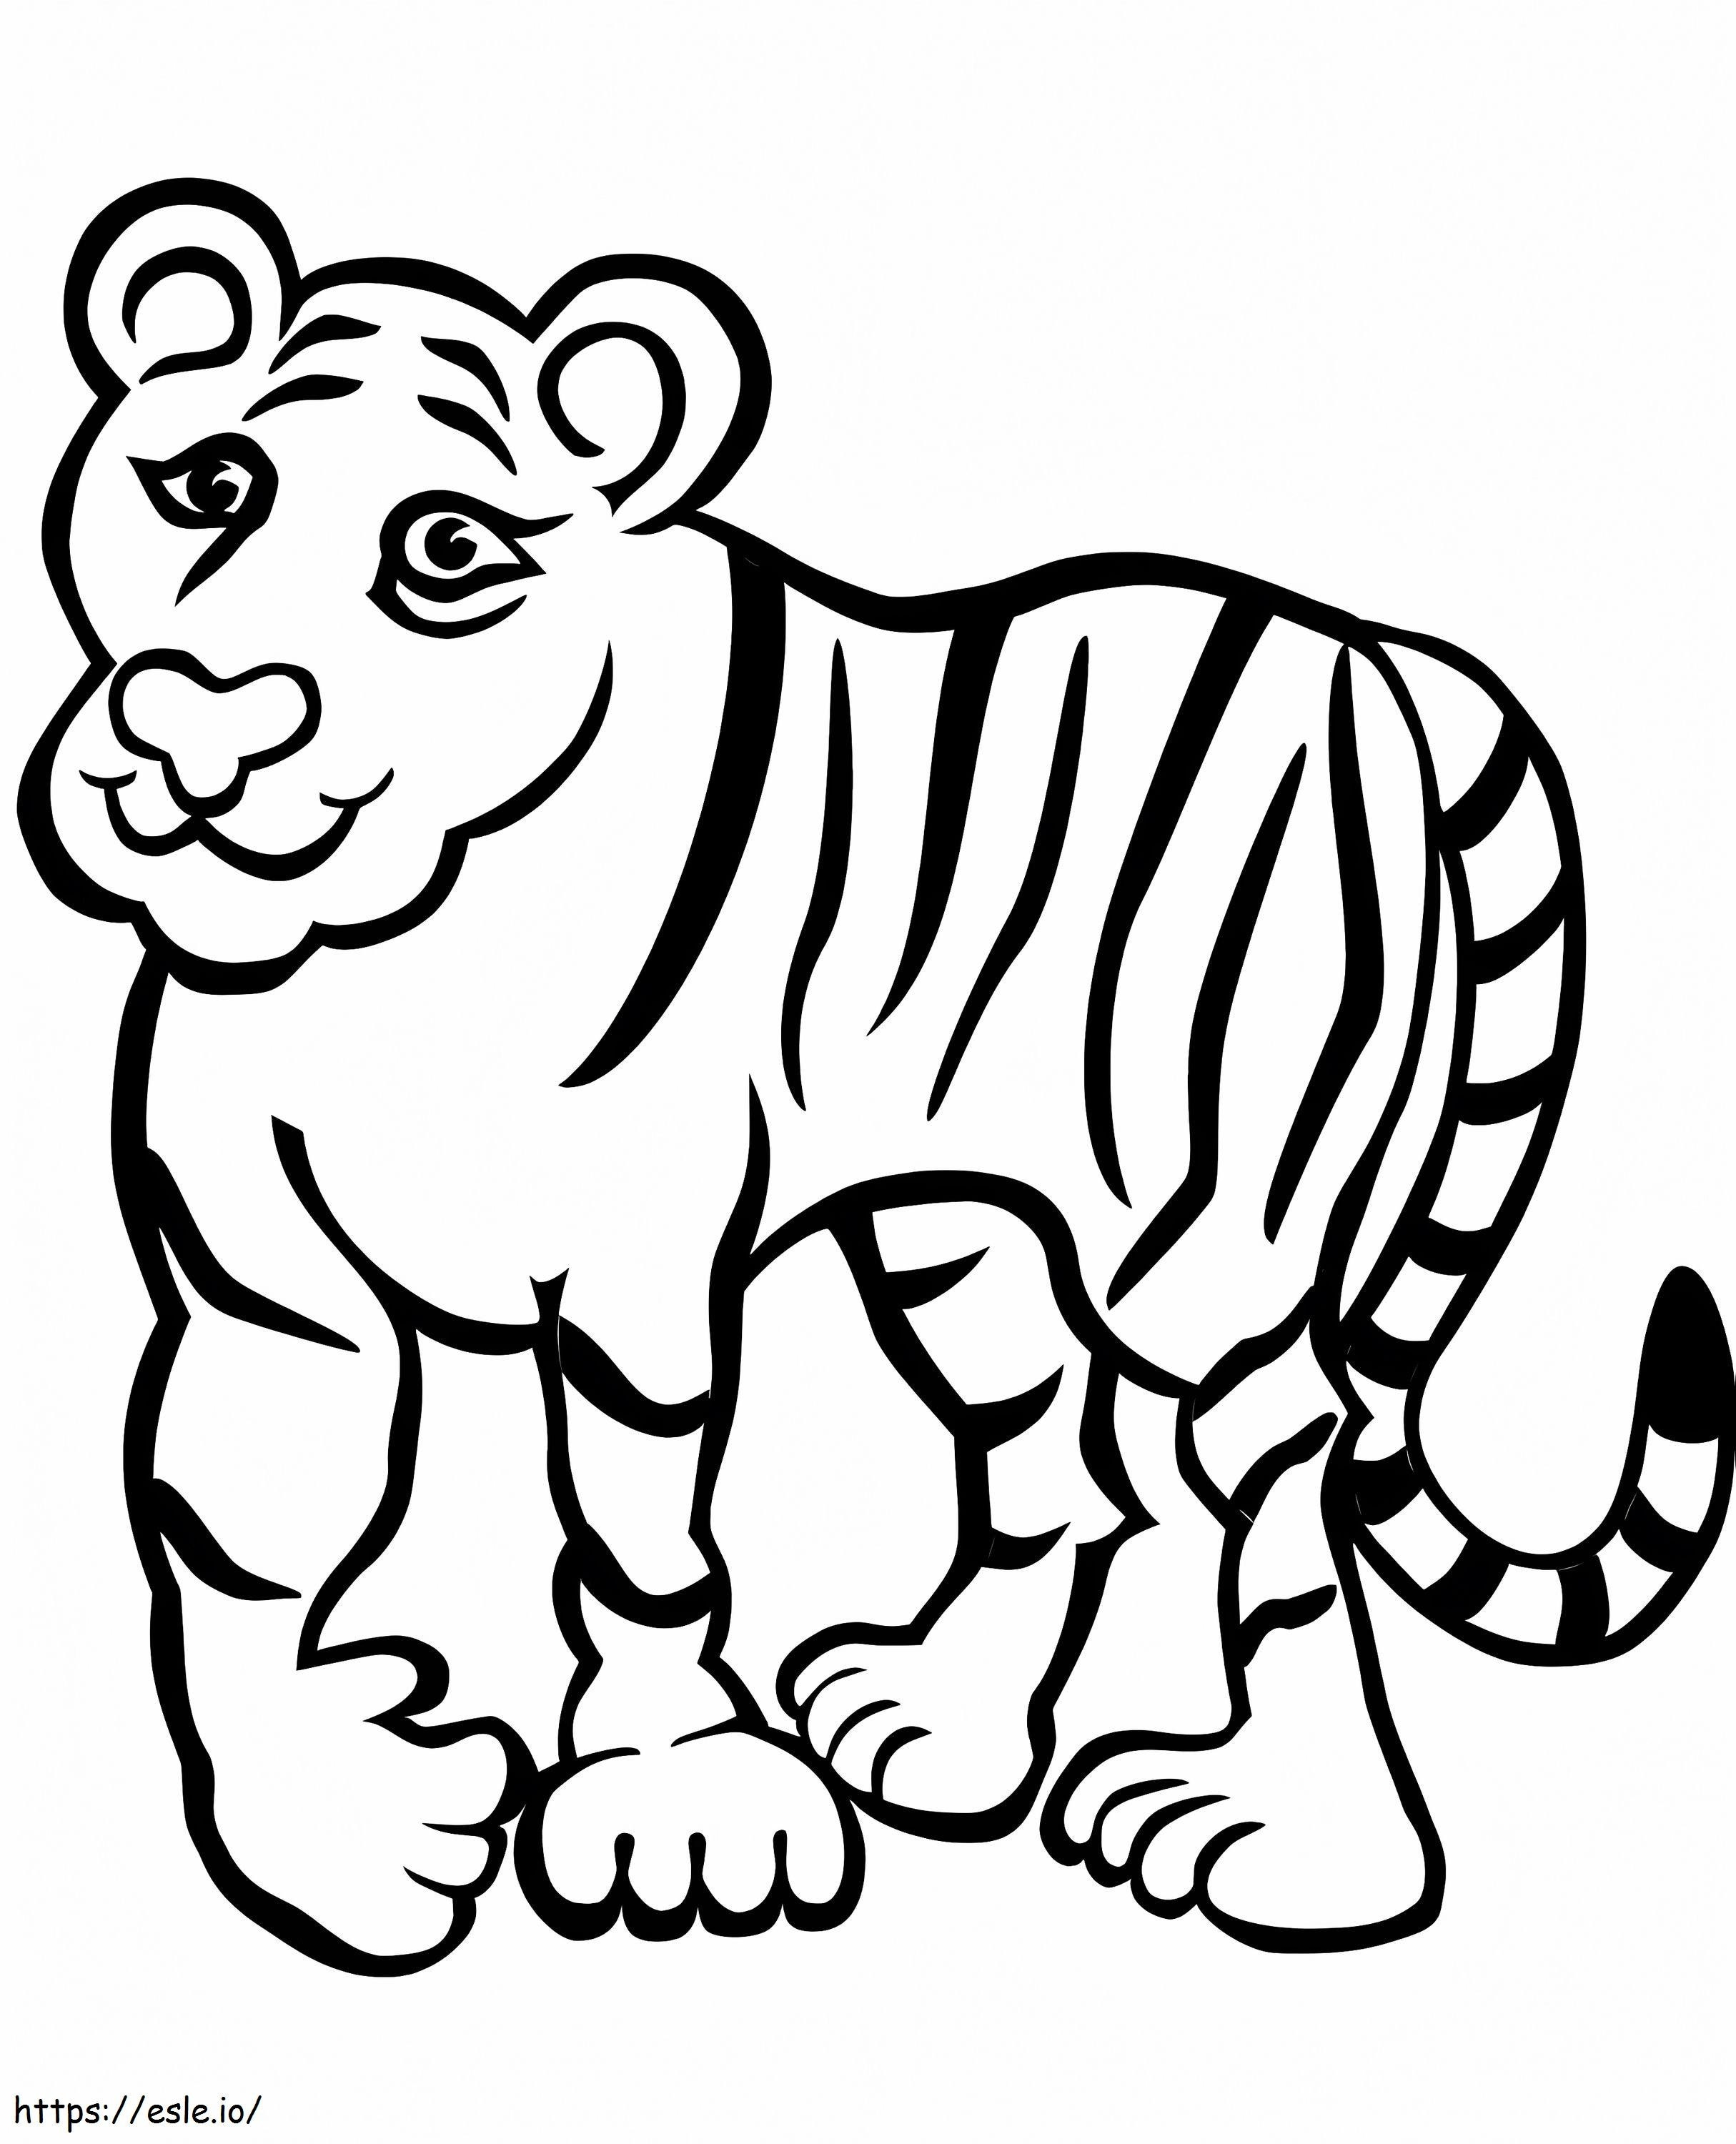 A Funny Tiger coloring page